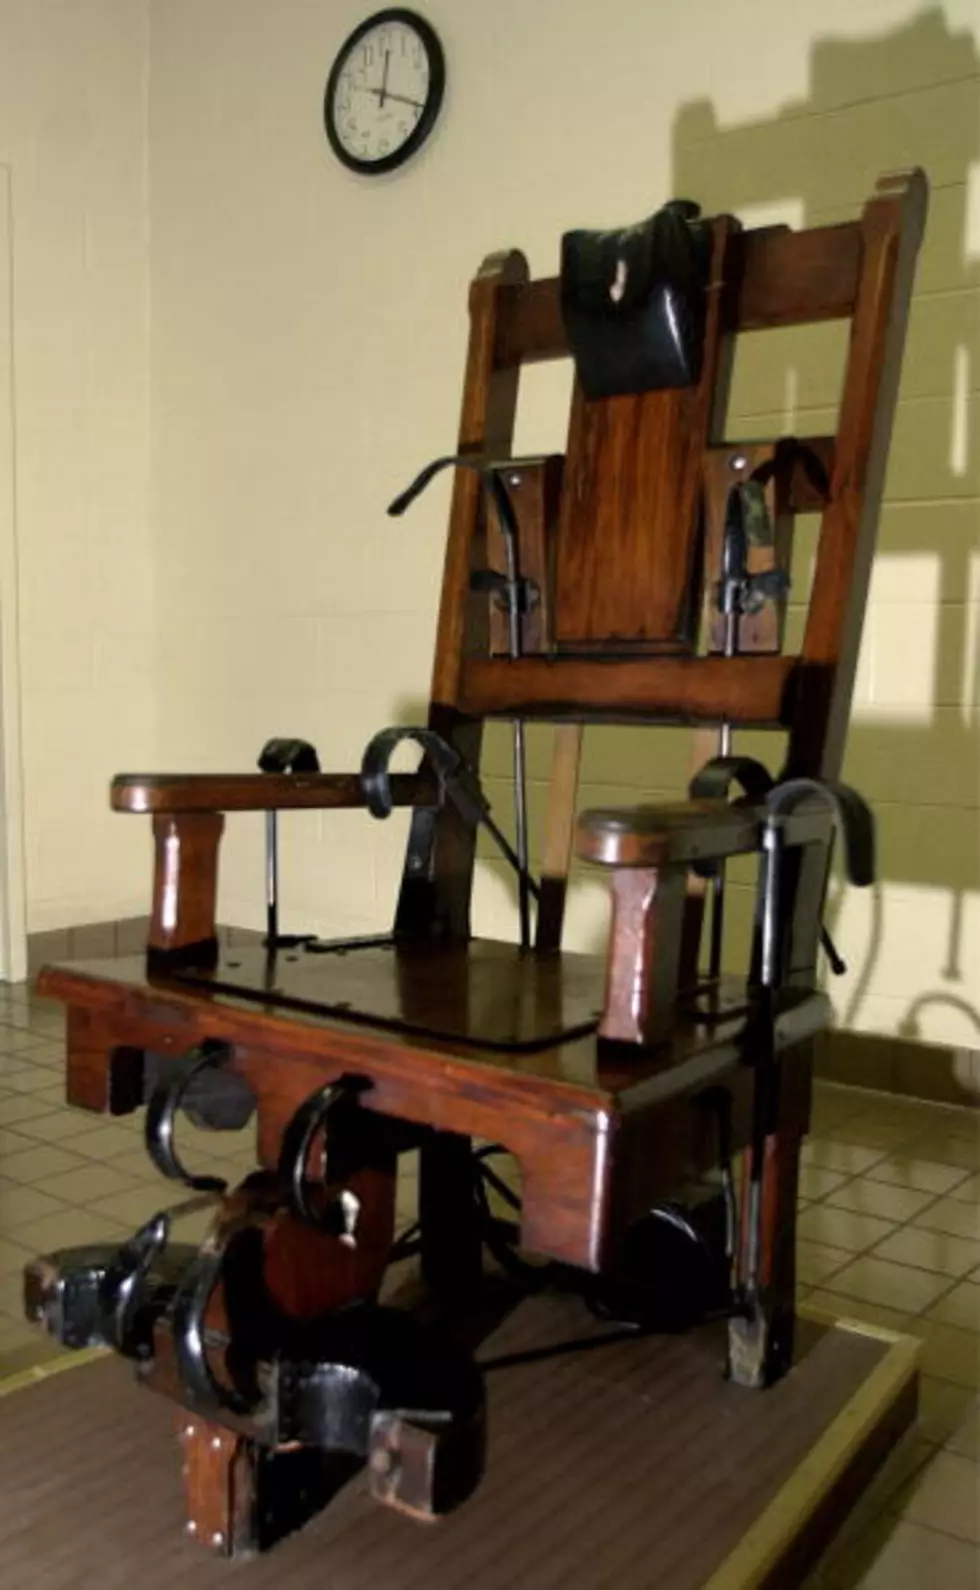 Husband Builds Electric Chair To Murder Wife Who Wants A Divorce